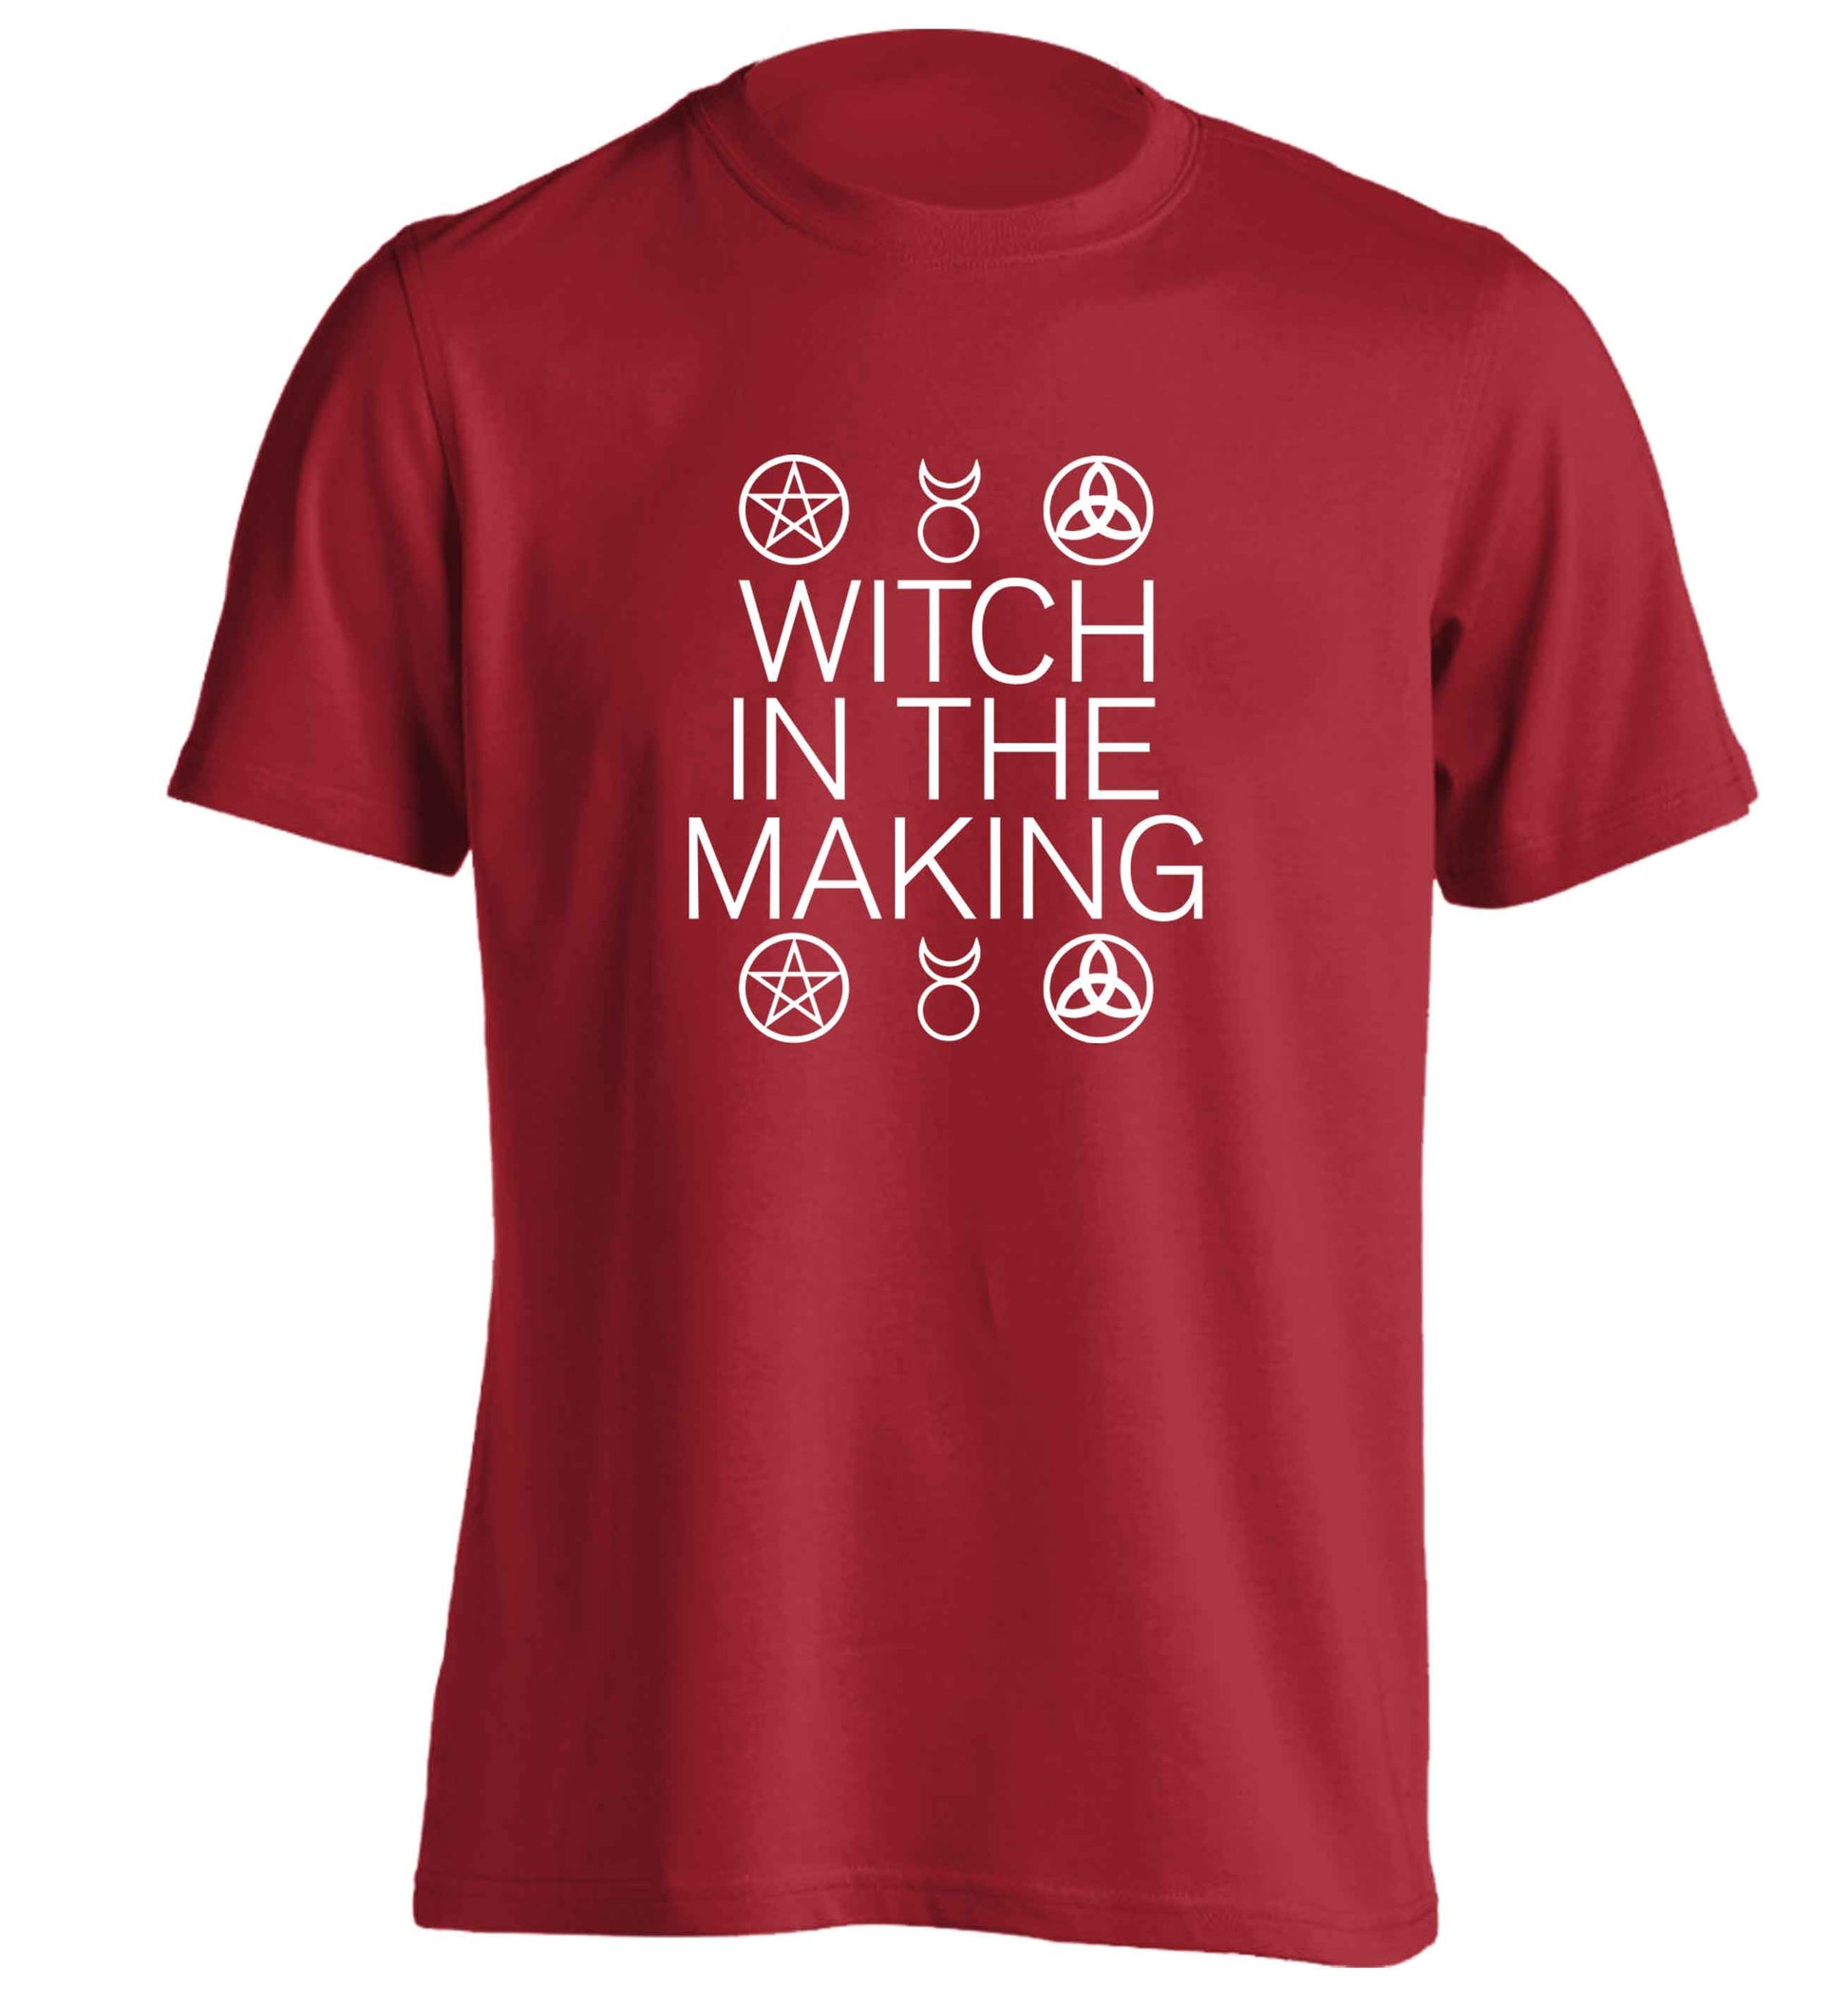 Witch in the making adults unisex red Tshirt 2XL